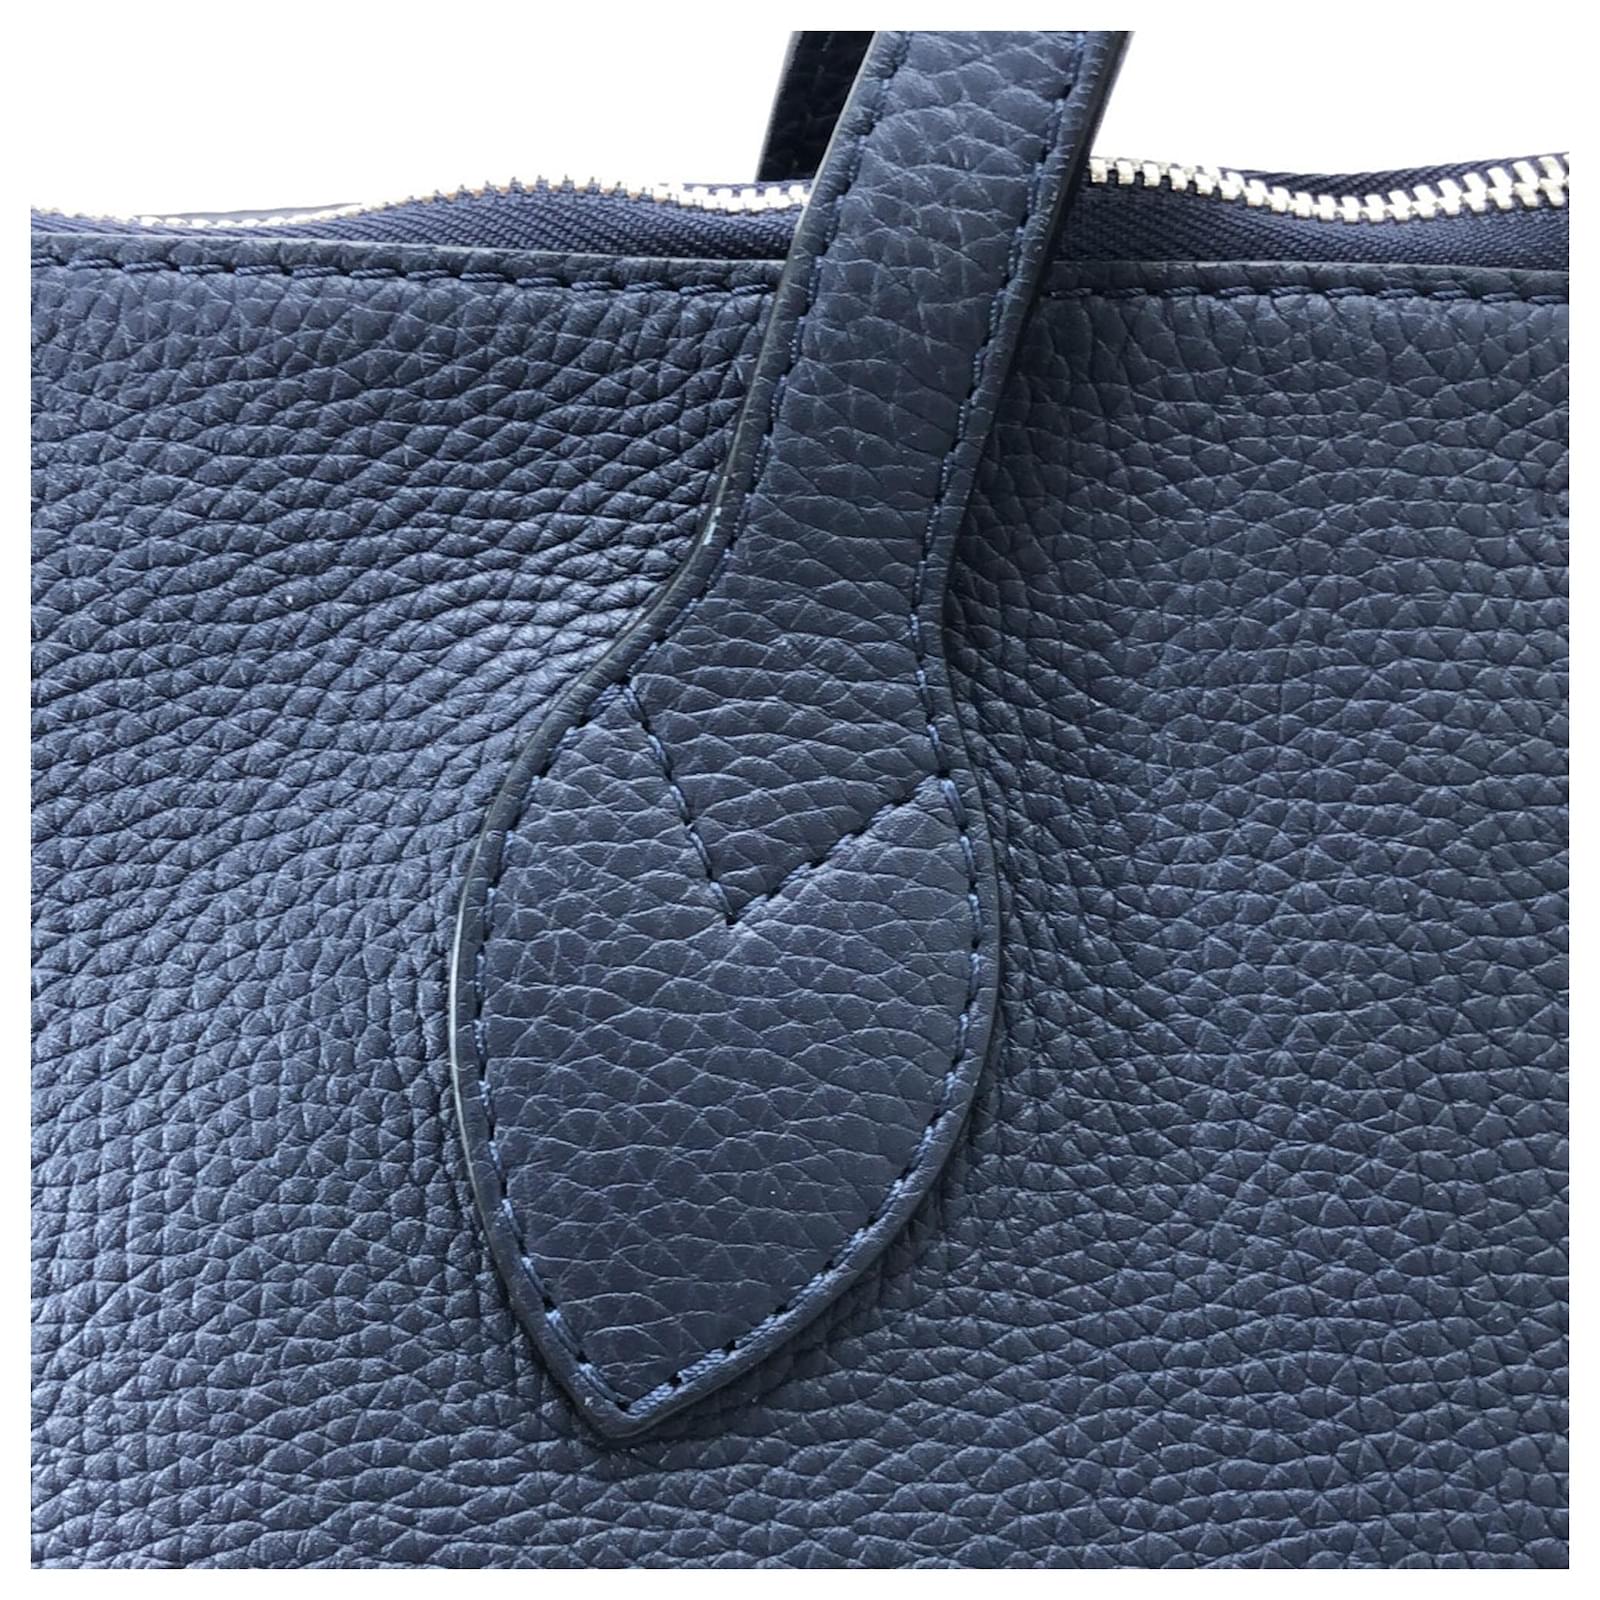 Louis Vuitton North South Zip Tote in Navy Taurillon Leather Mens